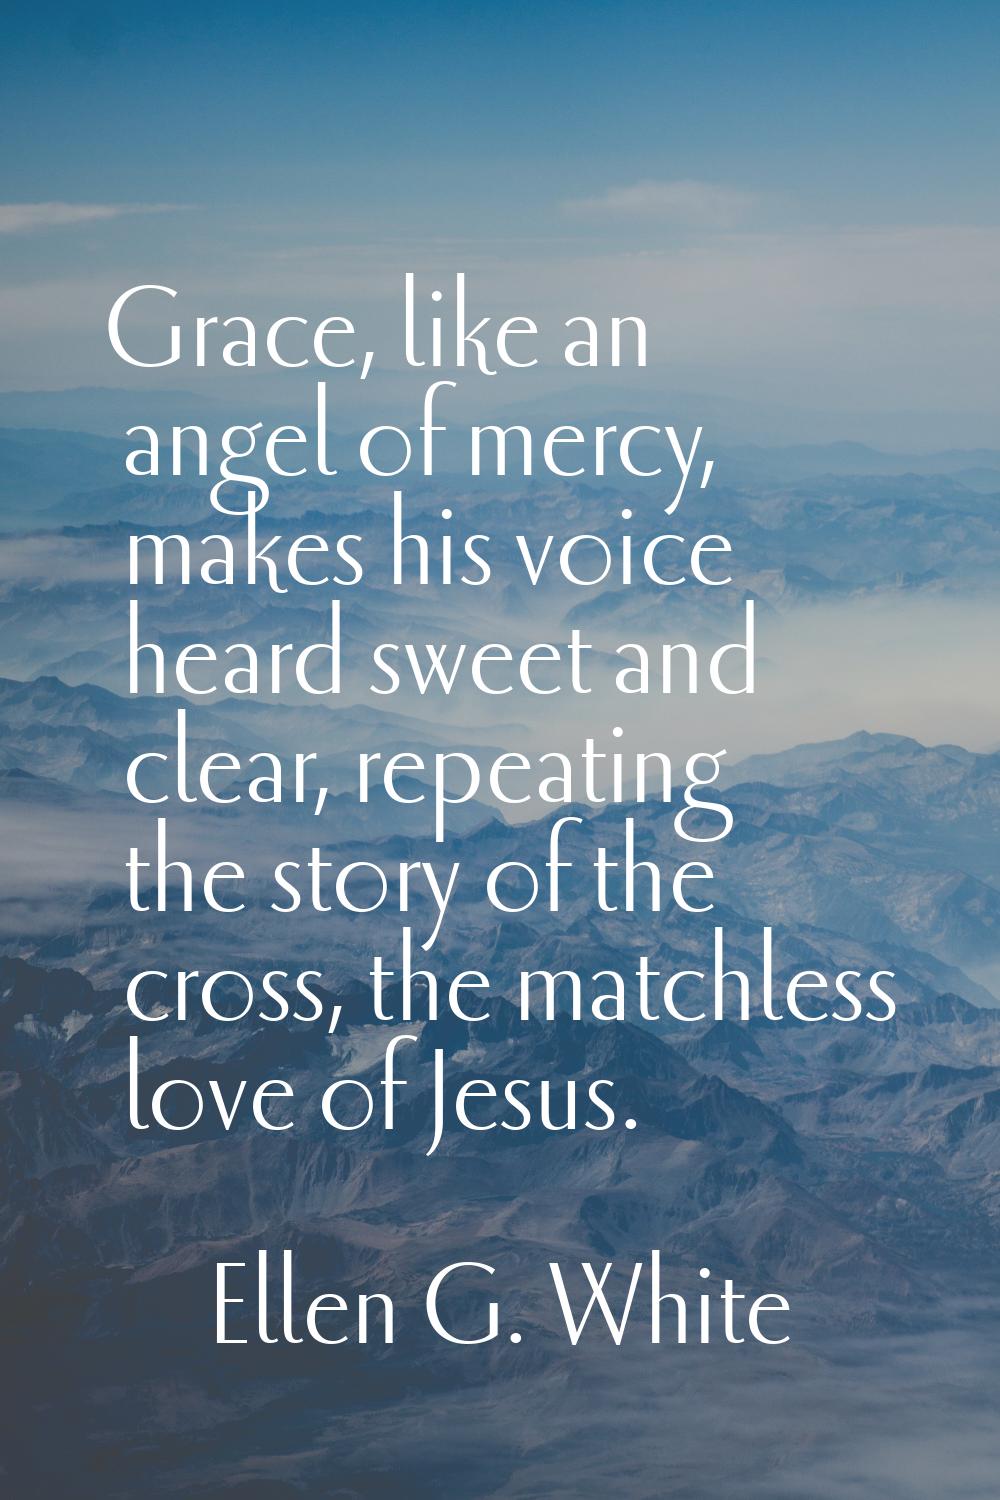 Grace, like an angel of mercy, makes his voice heard sweet and clear, repeating the story of the cr